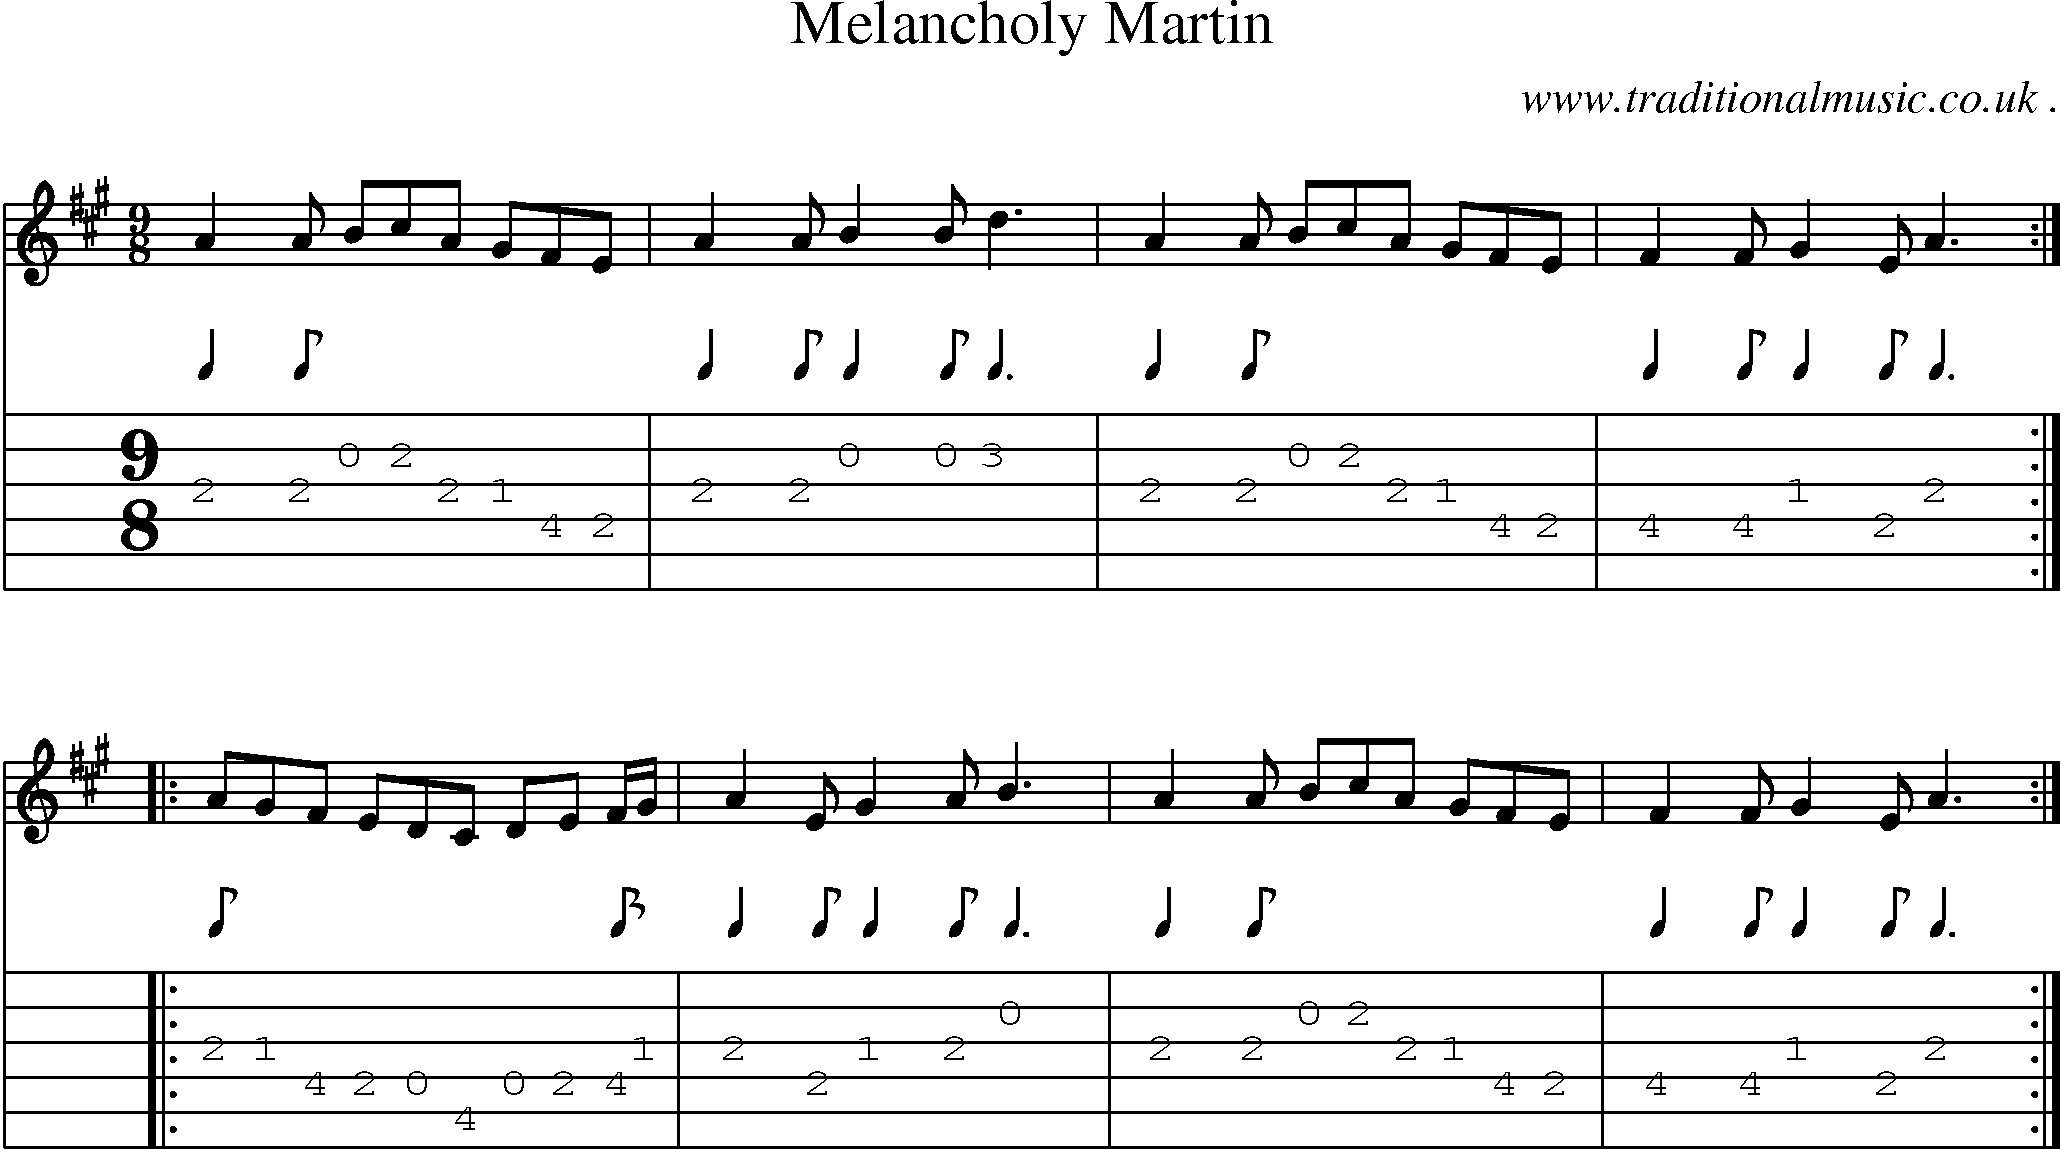 Sheet-Music and Guitar Tabs for Melancholy Martin